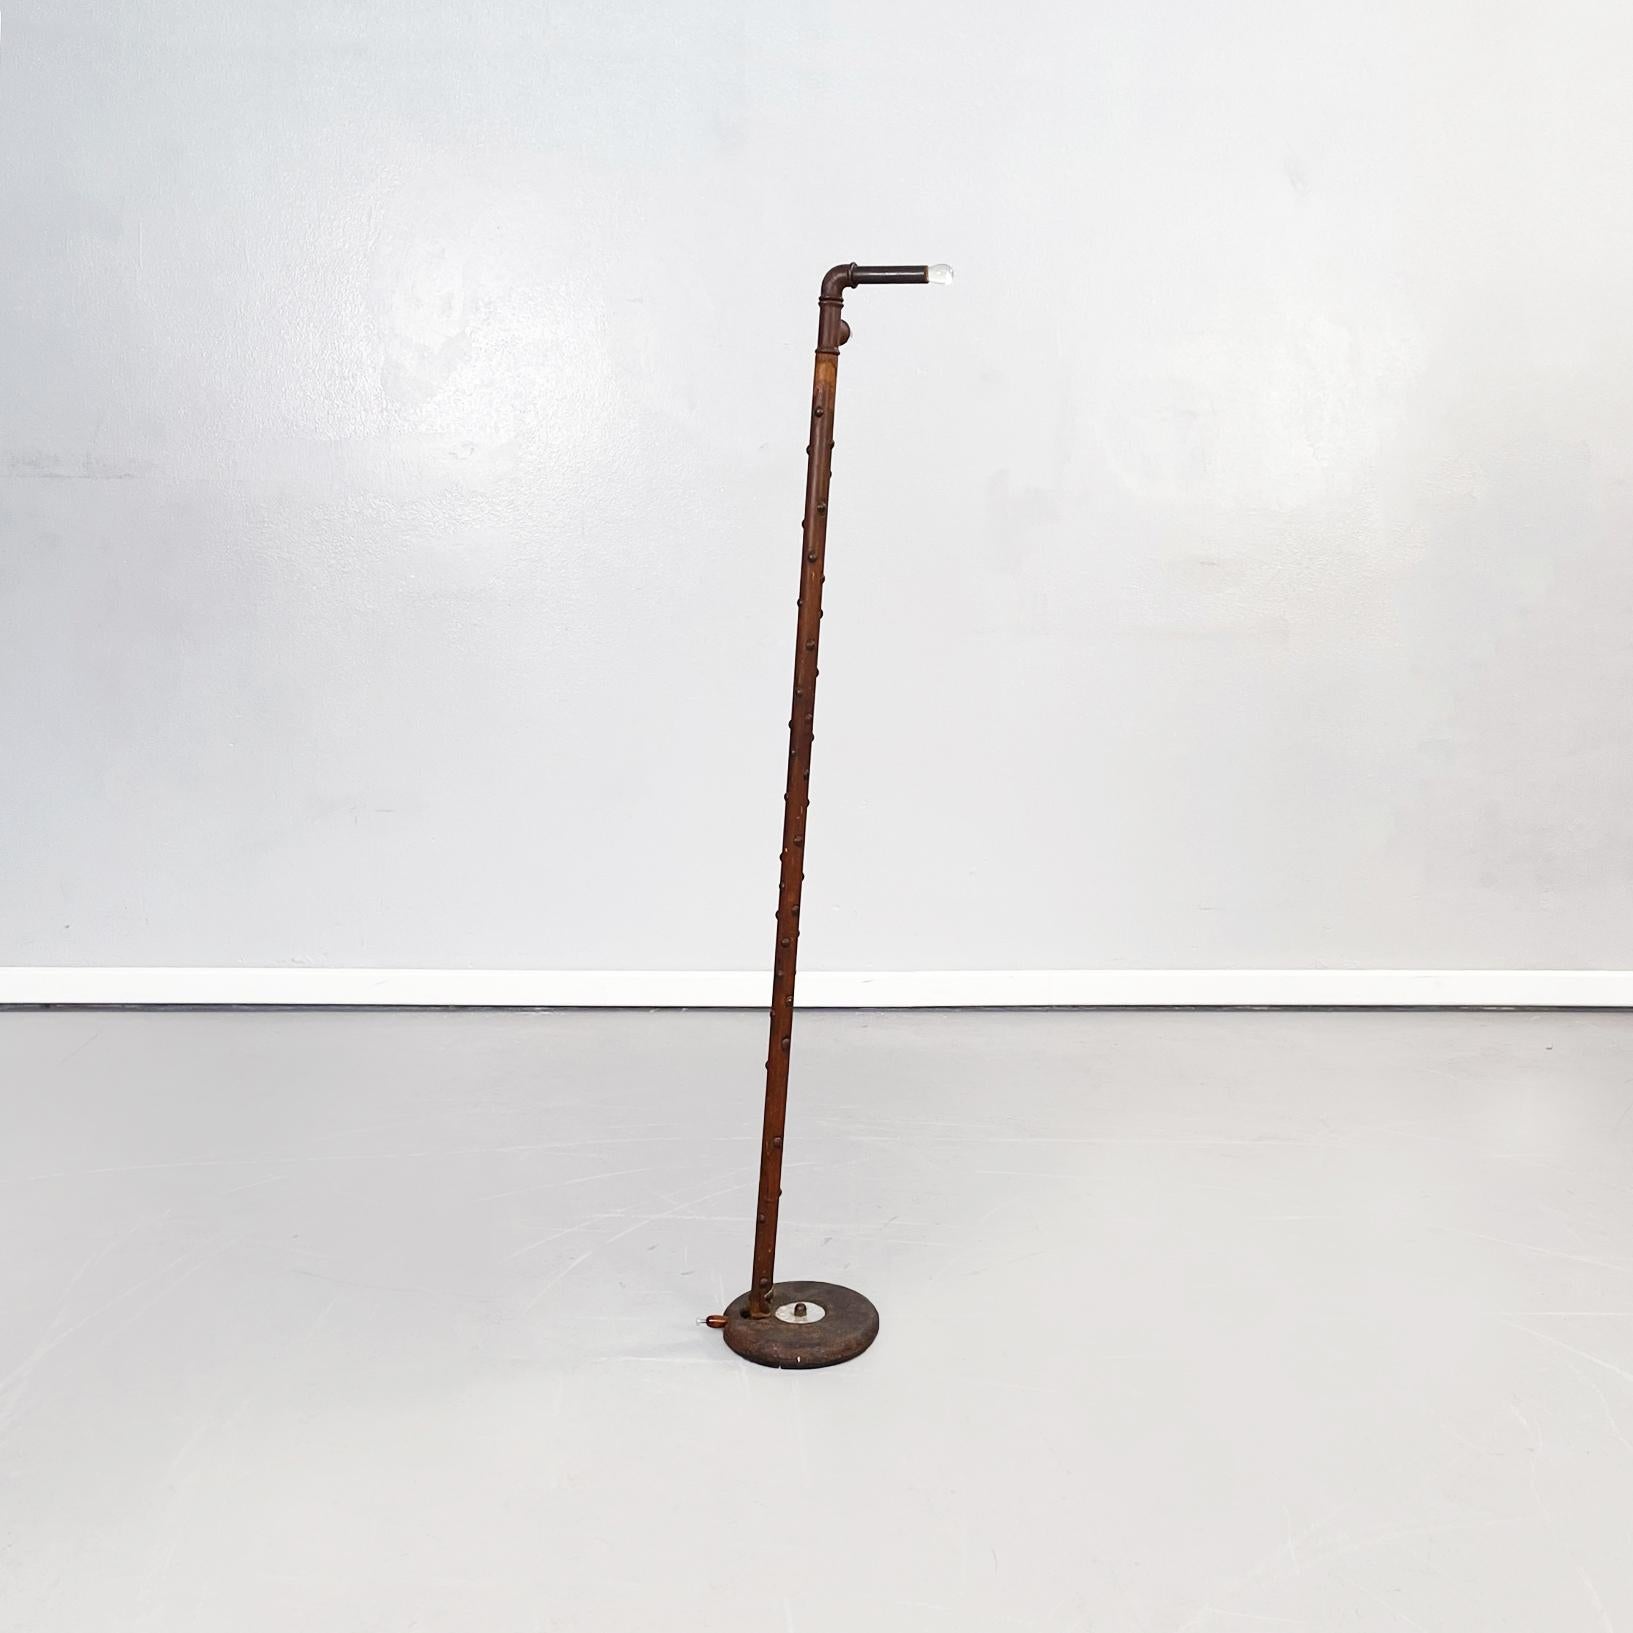 Italian modern wooden valet clothes stand with glass hooks by Fabiustita, 1990s
Valet clothes stand, with wooden hat holder. The central structure is composed of a wooden round section rod, decorated with small hemispheres. It has two hooks ending